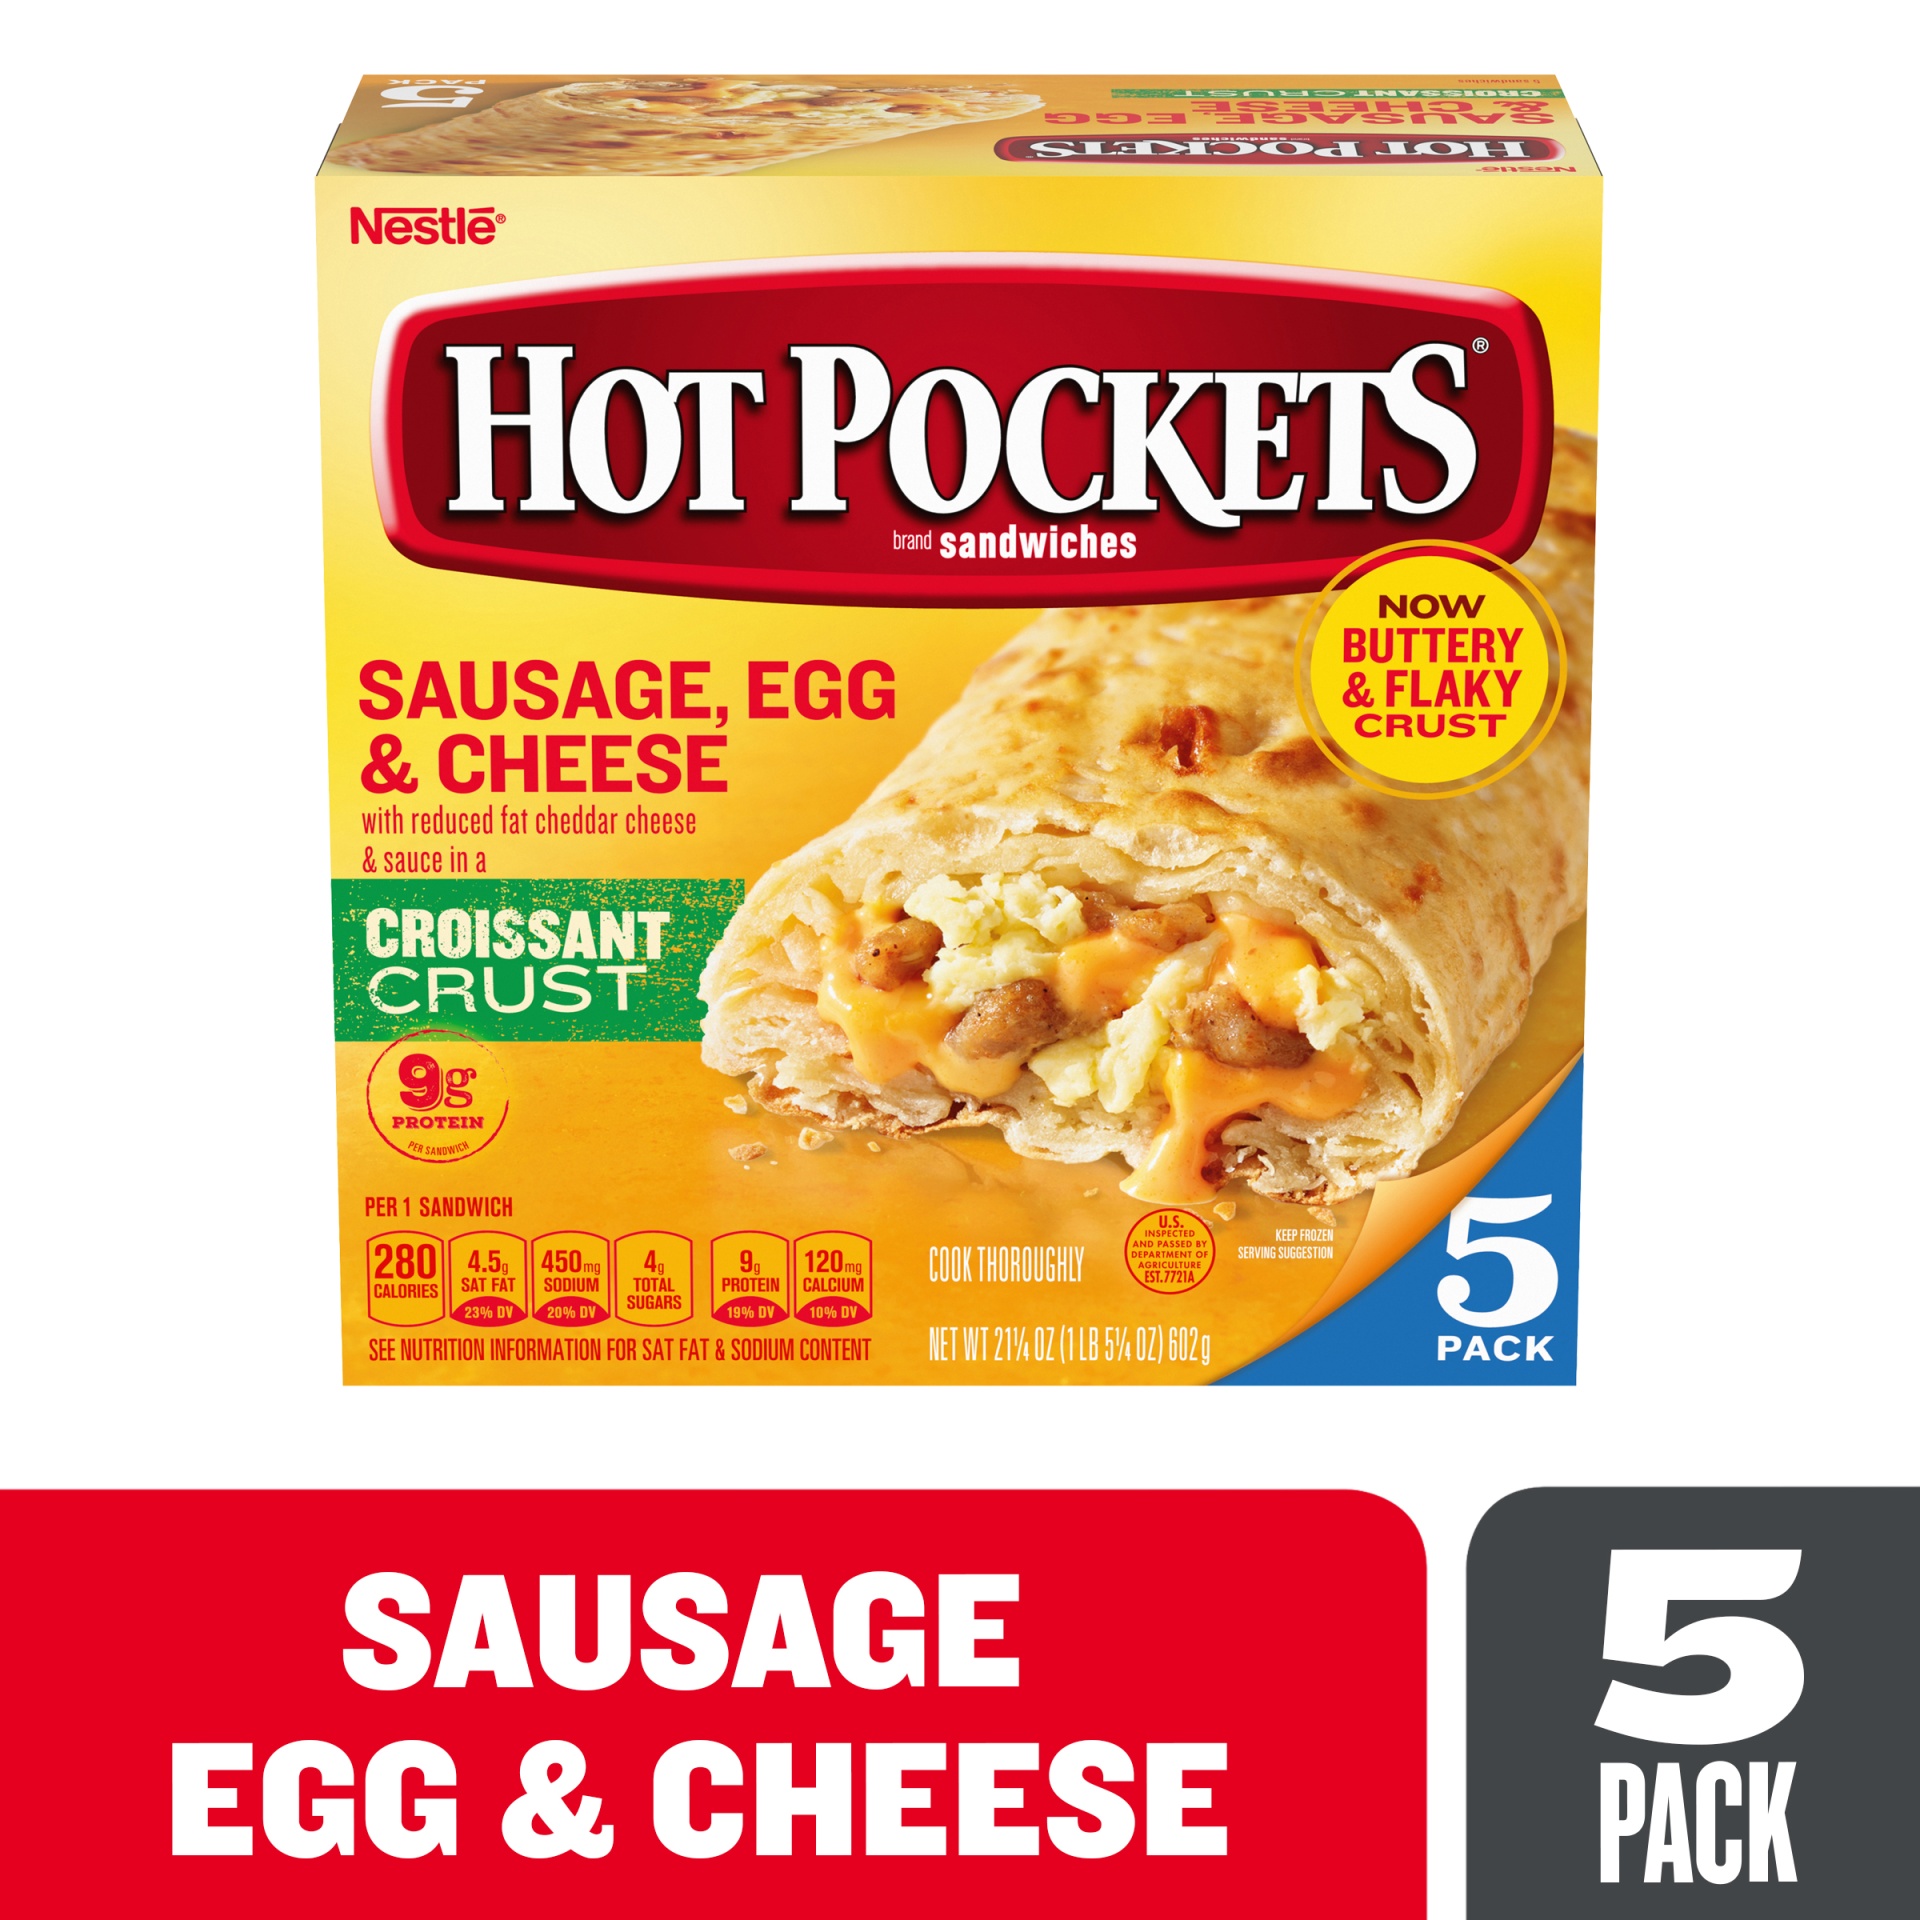 slide 2 of 6, Hot Pockets Sausage, Egg & Cheese Croissant Crust Frozen Breakfast Sandwiches, Breakfast Hot Pockets Made with Real Reduced Fat Cheddar Cheese, 5 Count, 5 ct